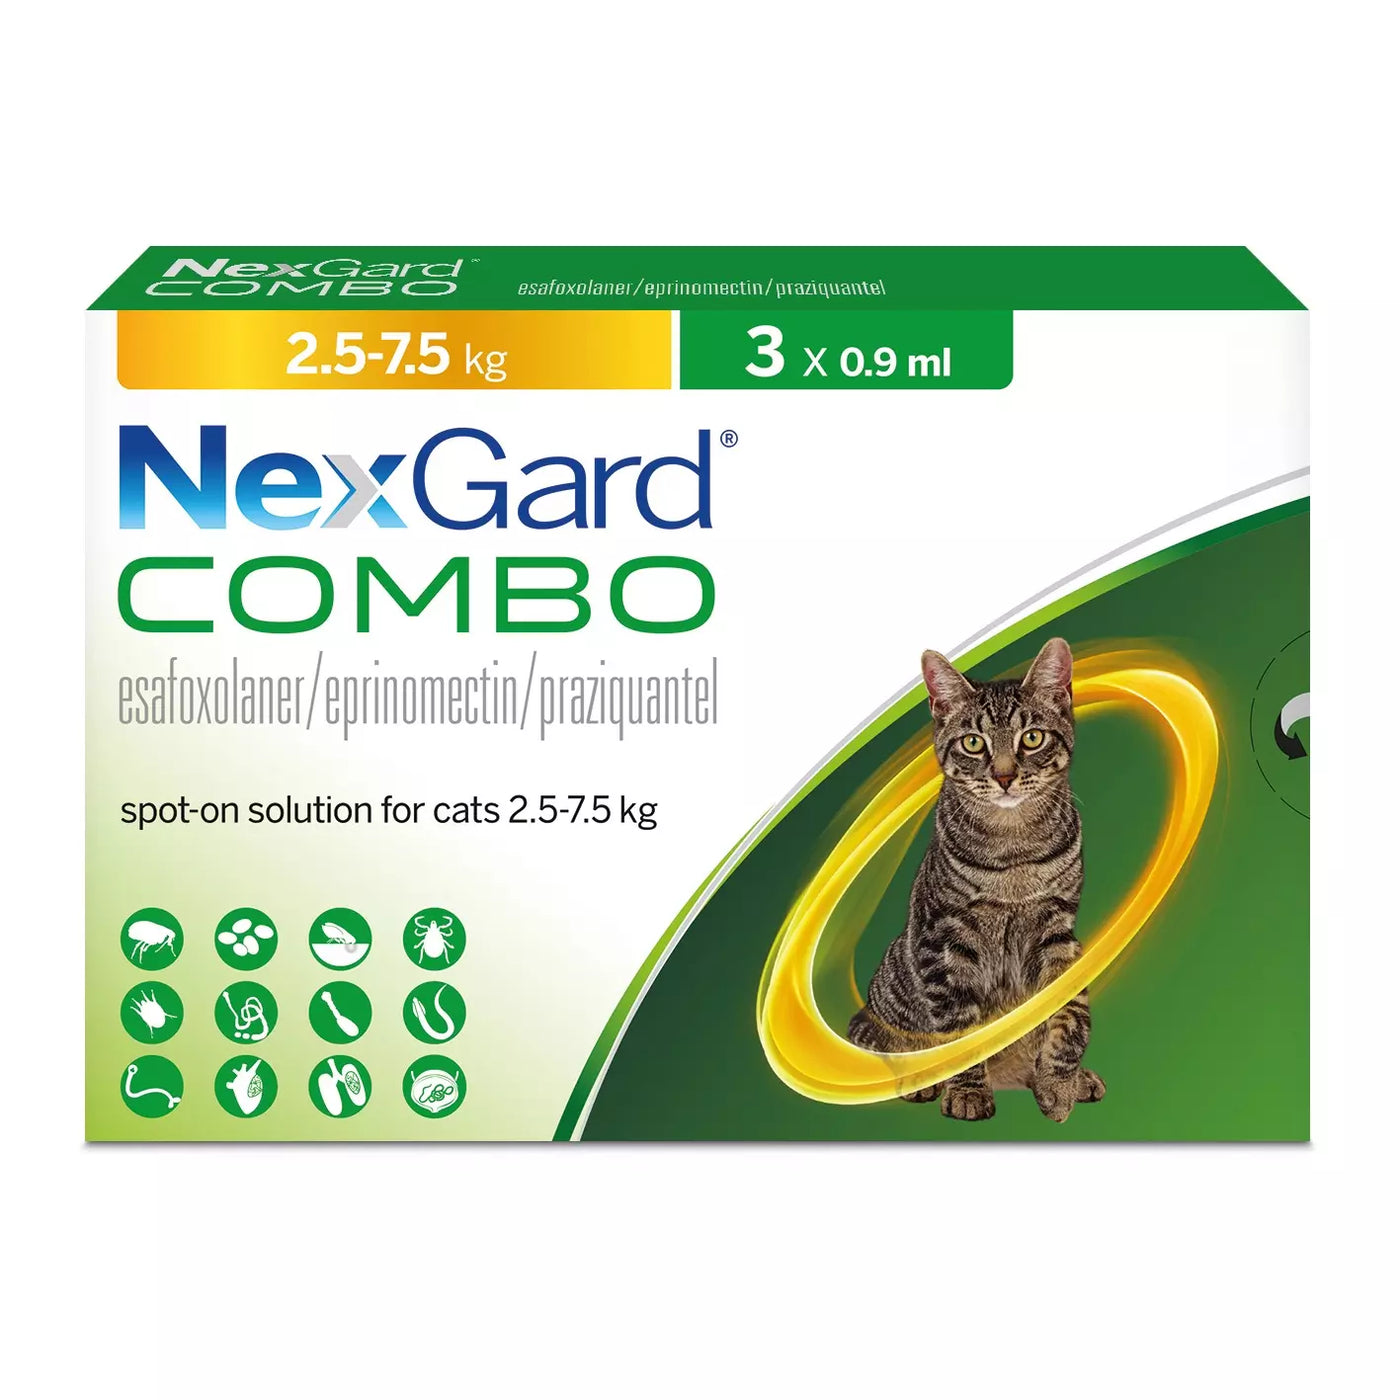 Nexgard Combo Spot-on Solution for Cats